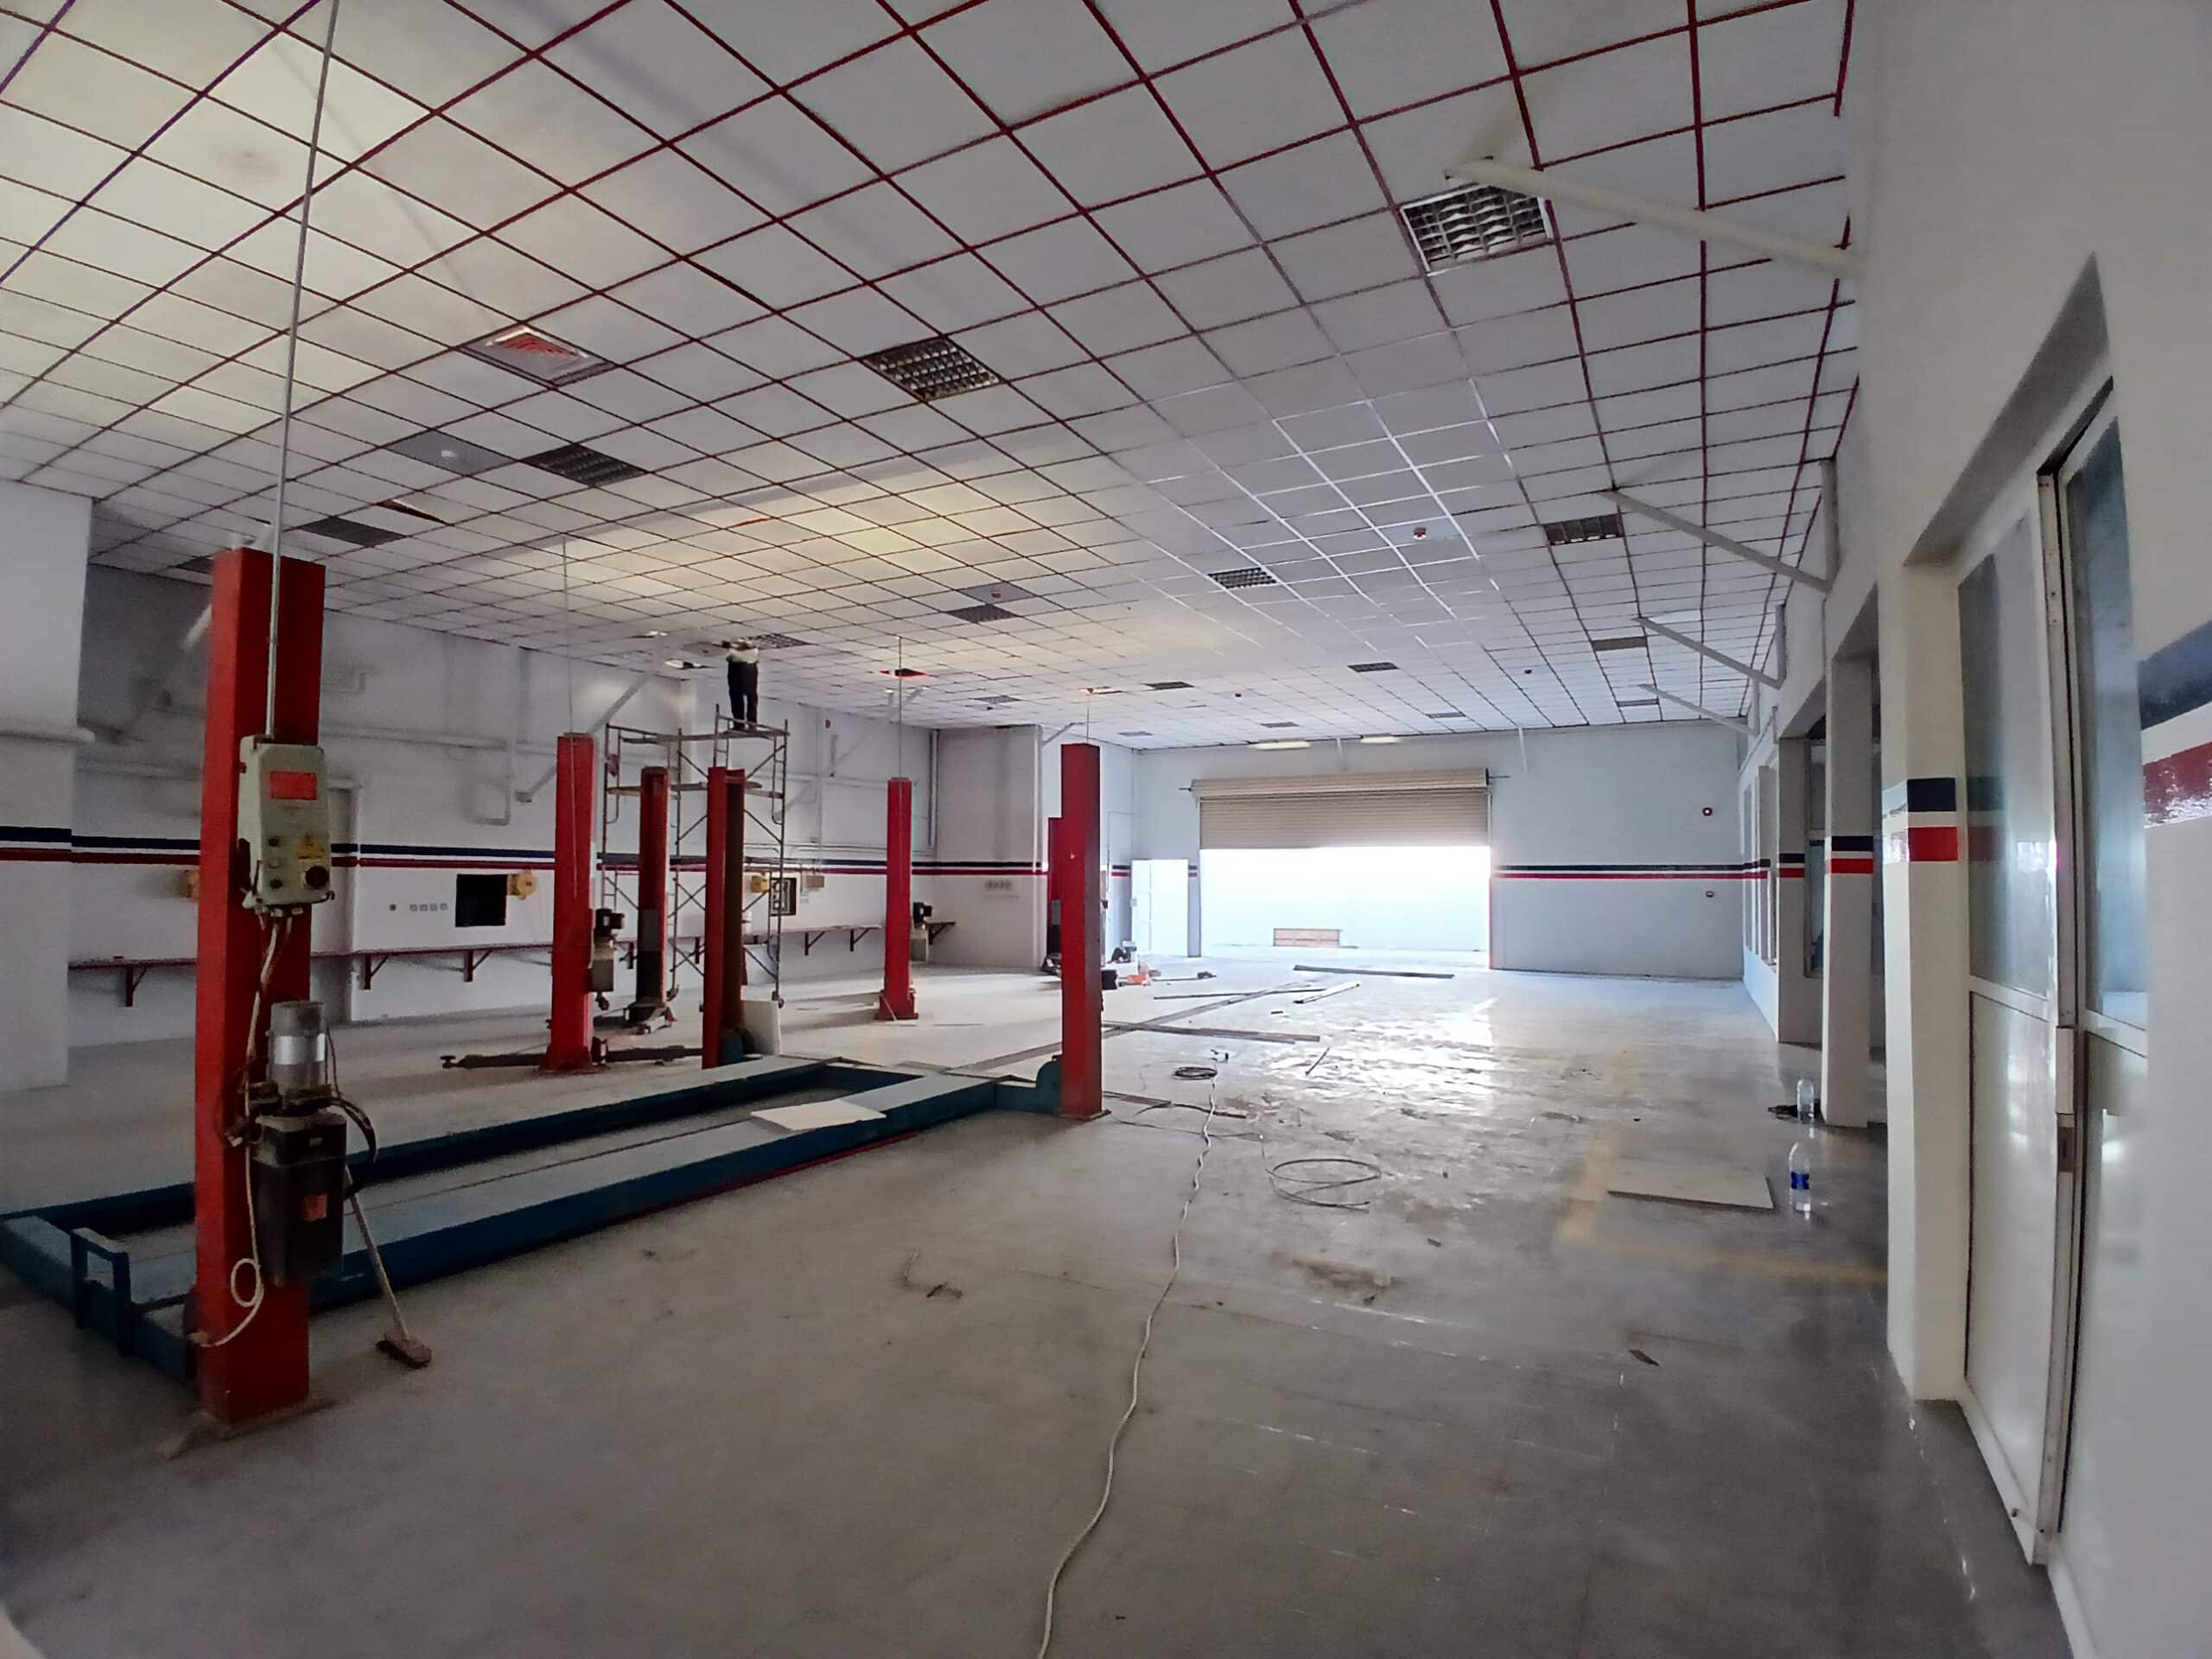 Interior of an empty garage with scattered red hydraulic car lifts, dangling ceiling tiles, and a white and red checkered floor.